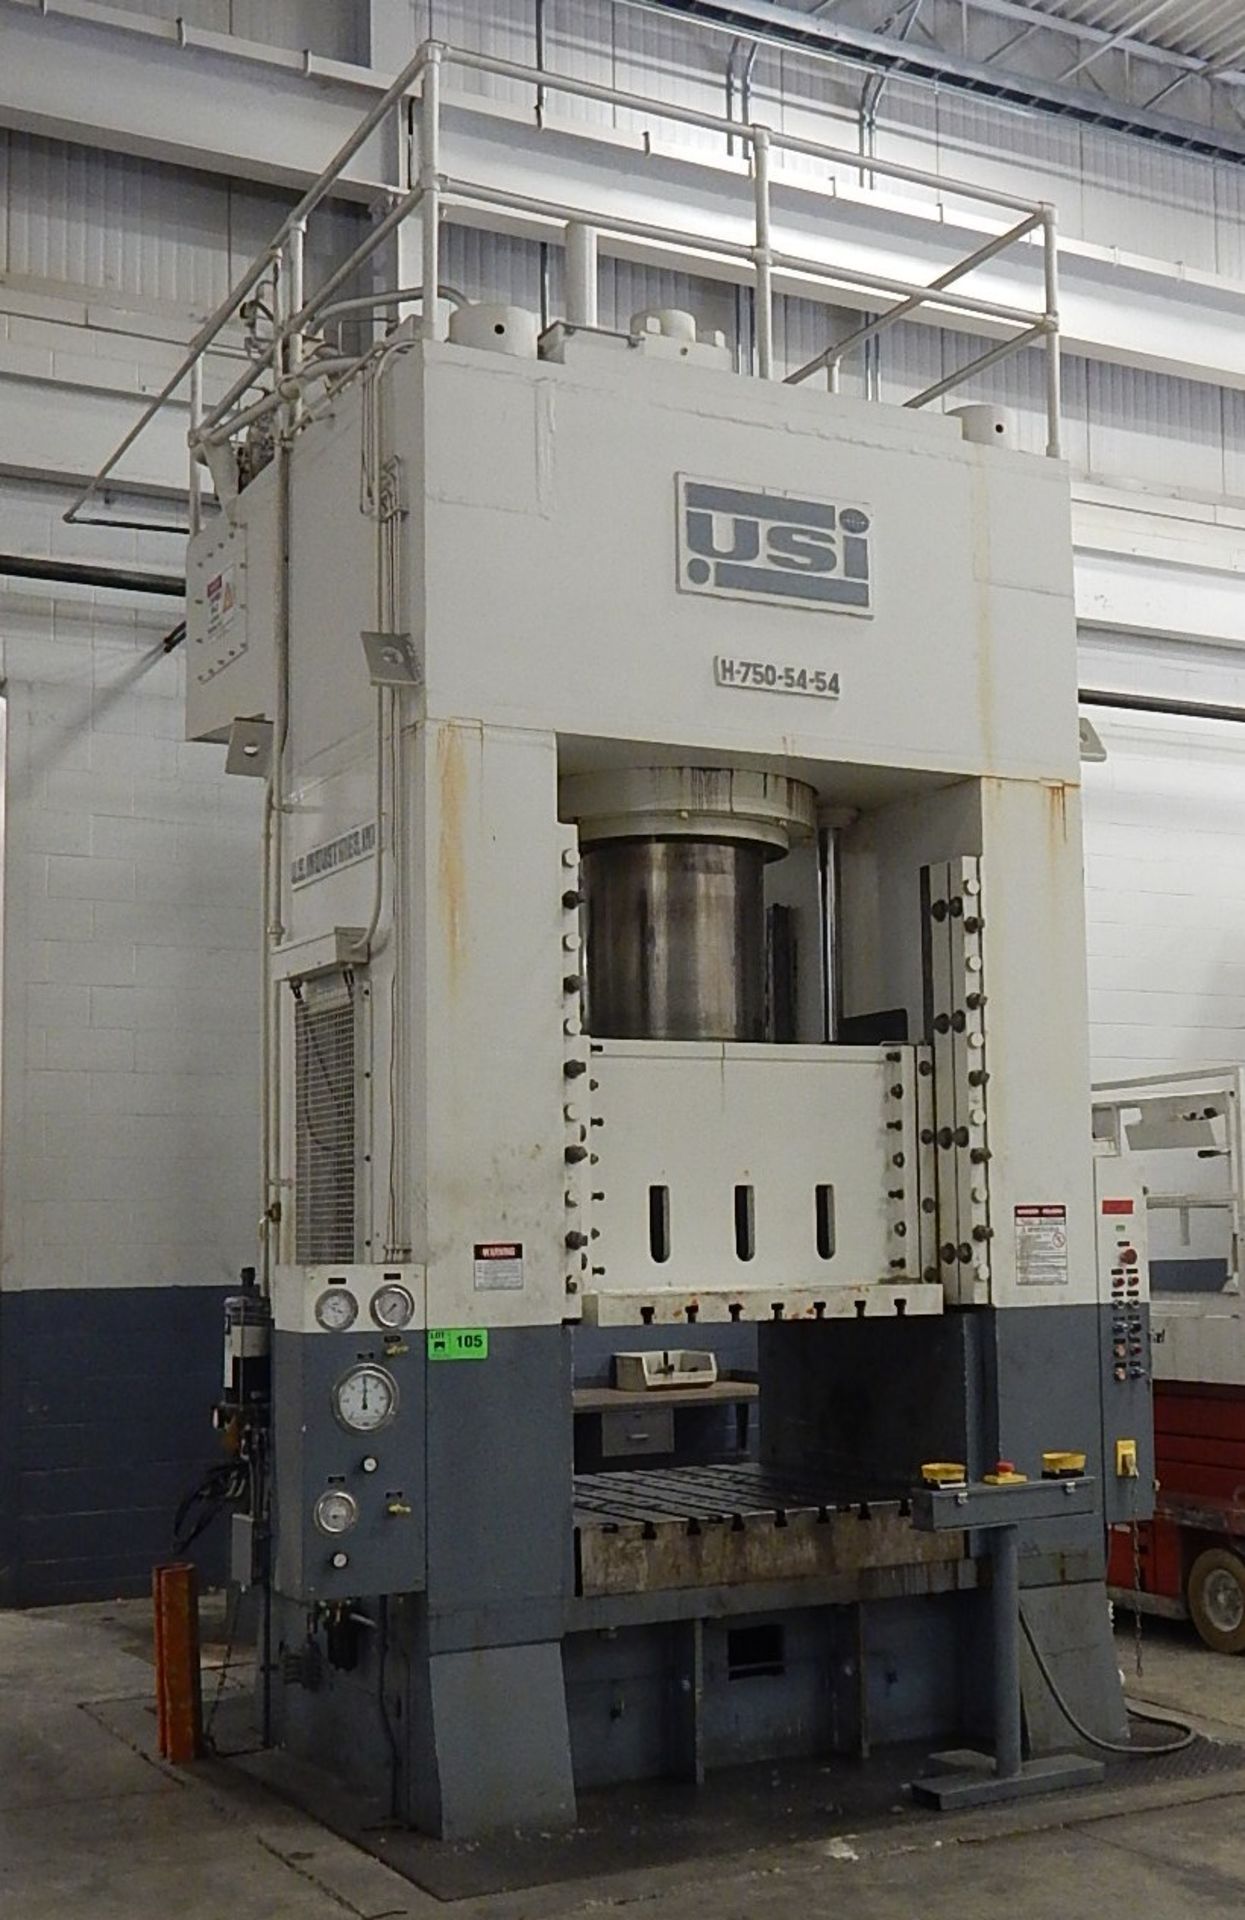 USI H-750-54-54 750 TON STRAIGHT SIDE HYDRAULIC PRESS WITH 54" X 54" T-SLOT TABLE, 5 SLIDES PER/ - Image 2 of 2